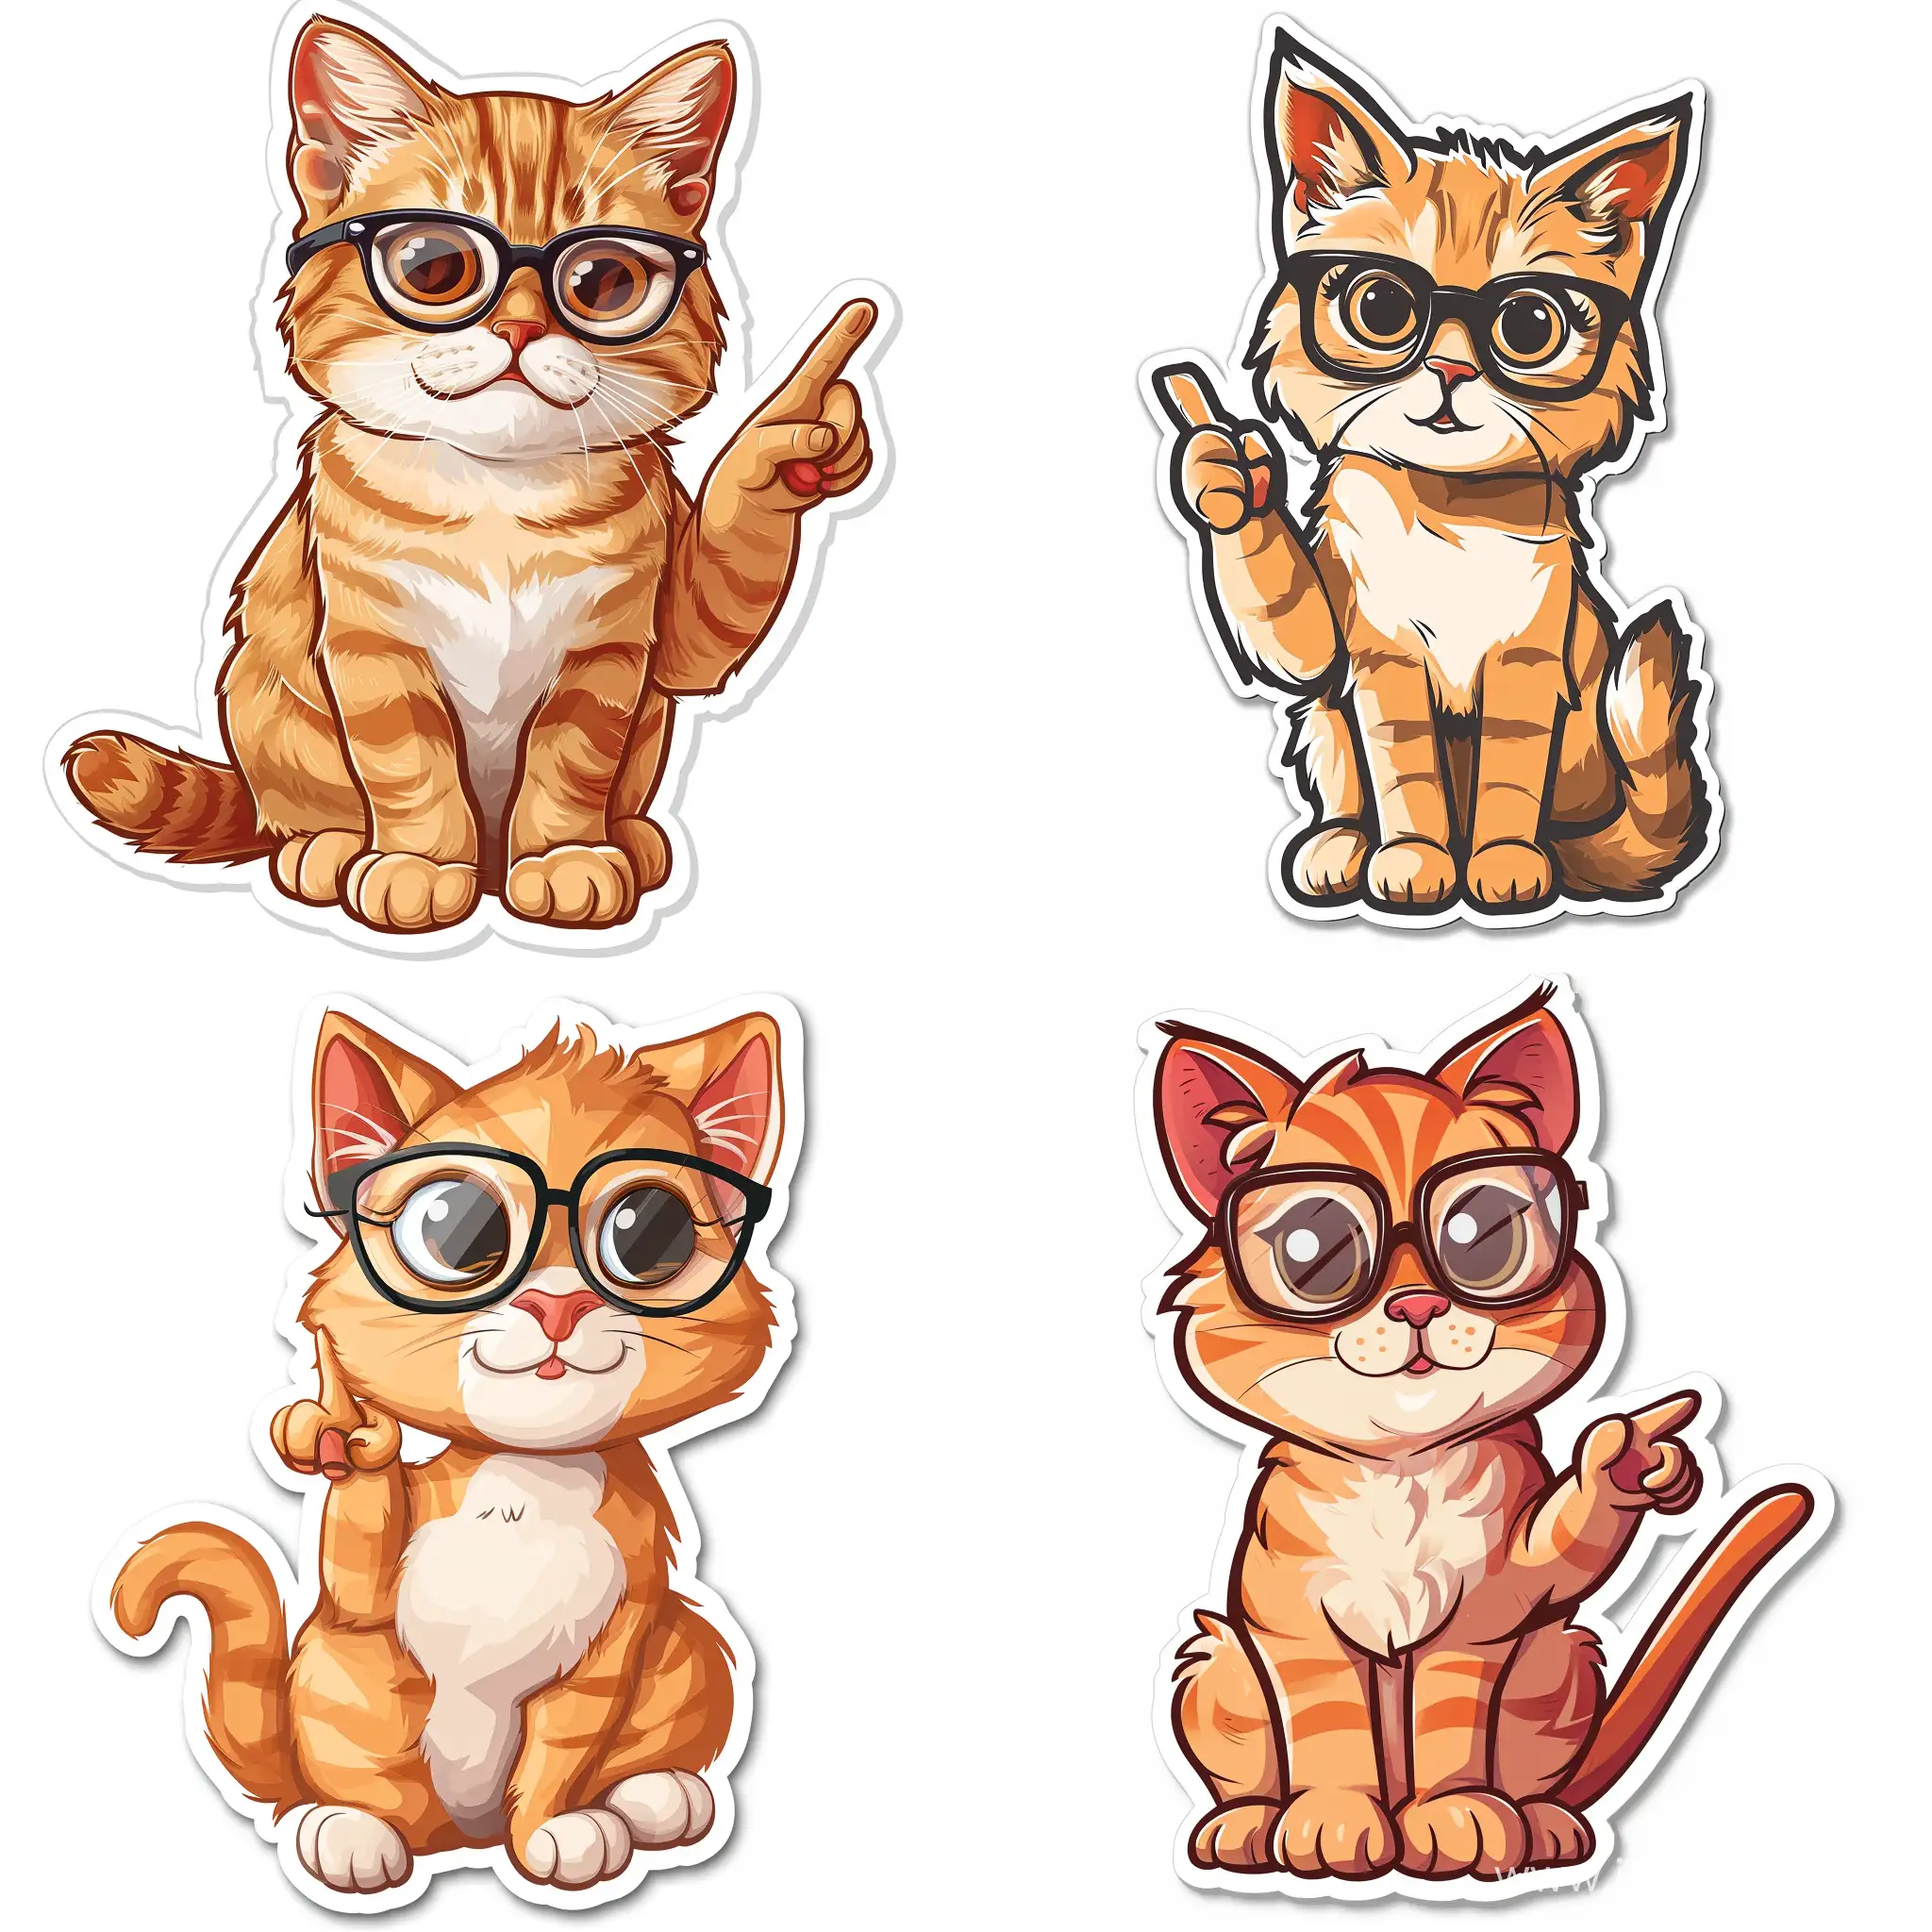 Adorable-Sticker-of-a-Wise-Orange-Cat-with-Glasses